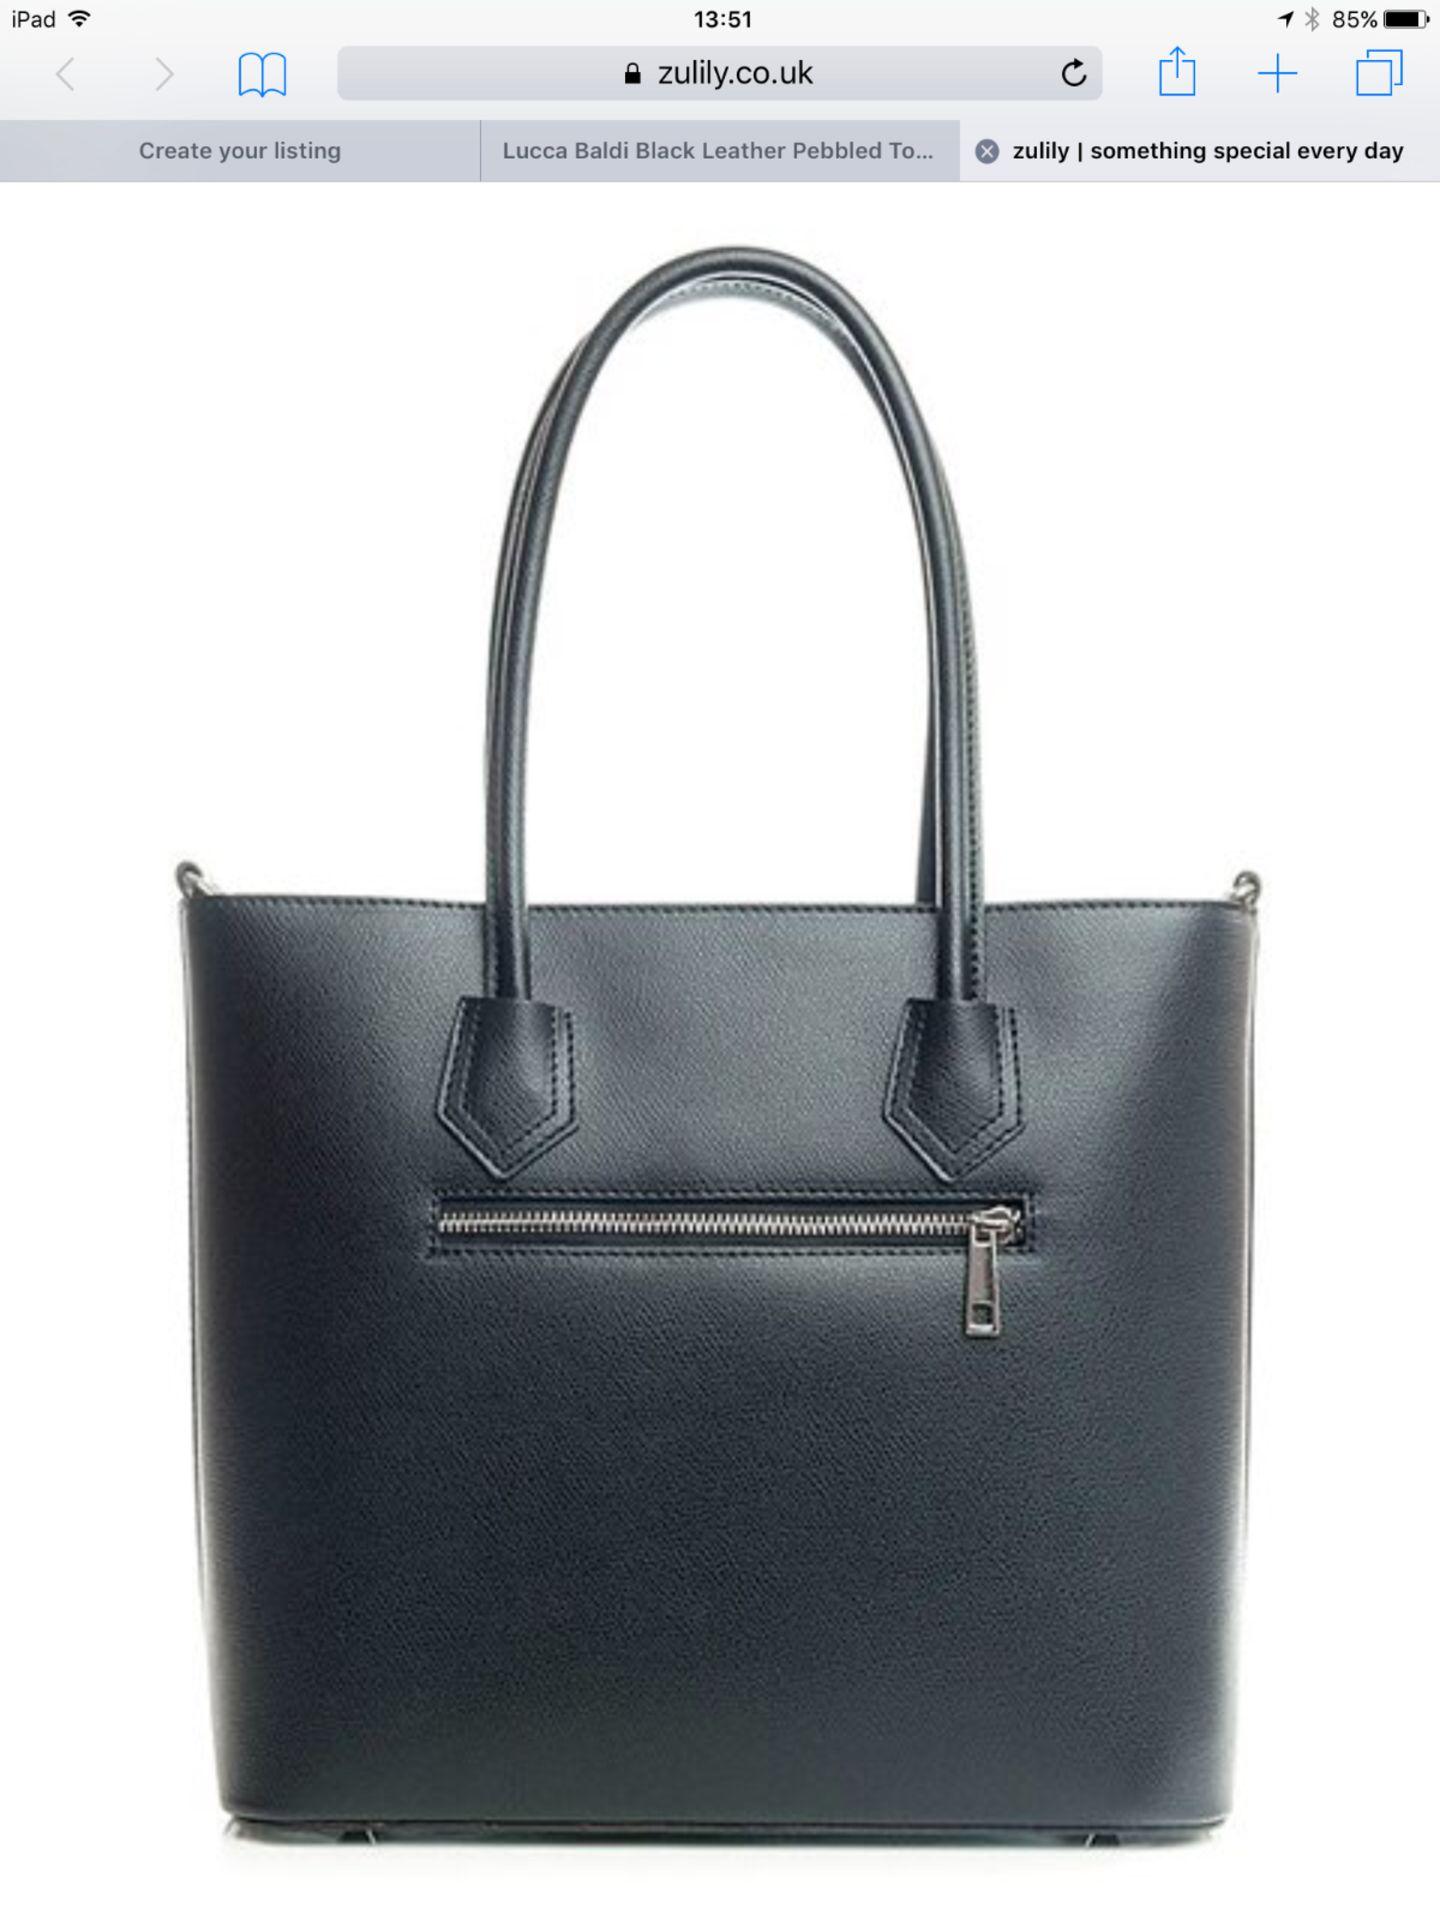 Lucca Baldi Black Leather Pebbled Tote (New with tags) [Ref: 45914641- T-101] - Image 3 of 6